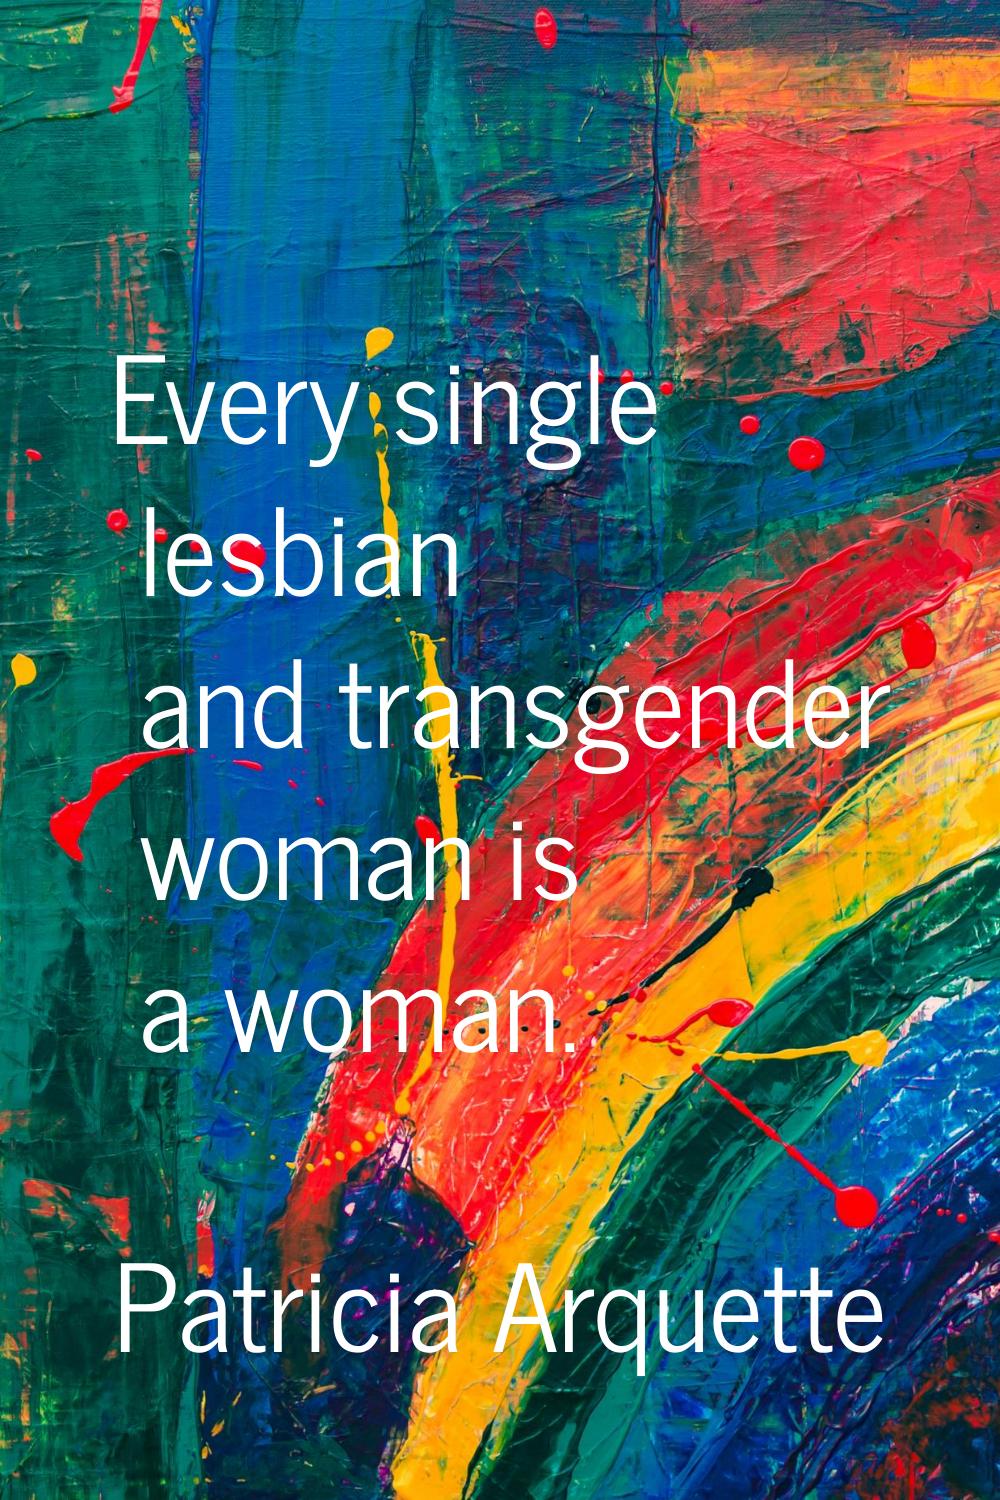 Every single lesbian and transgender woman is a woman.